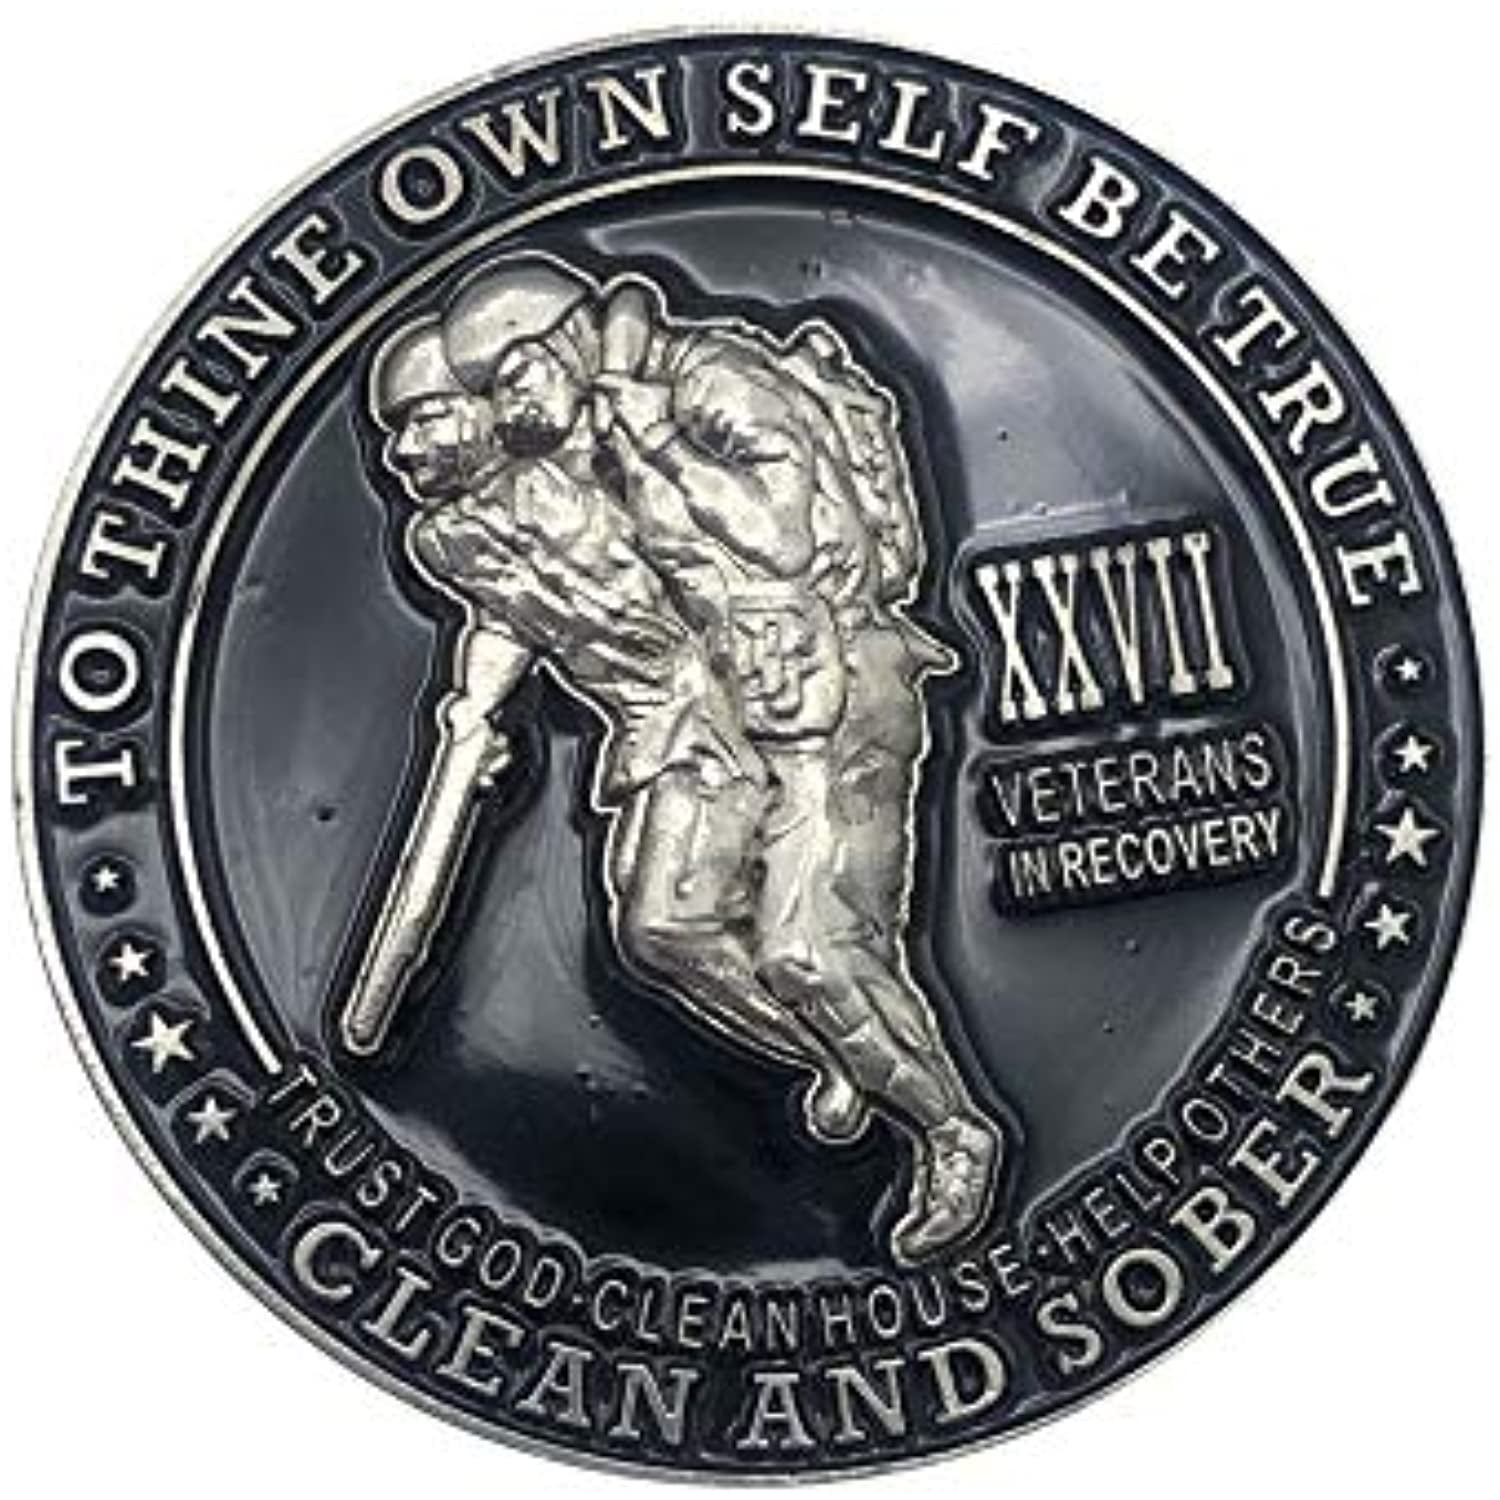 Veterans in Recovery AA Chip Sobriety Coin an AA Medallion Showing a Token of Appreciation for Those That Served. with Third Step Prayer on The Back 1-60 Years 